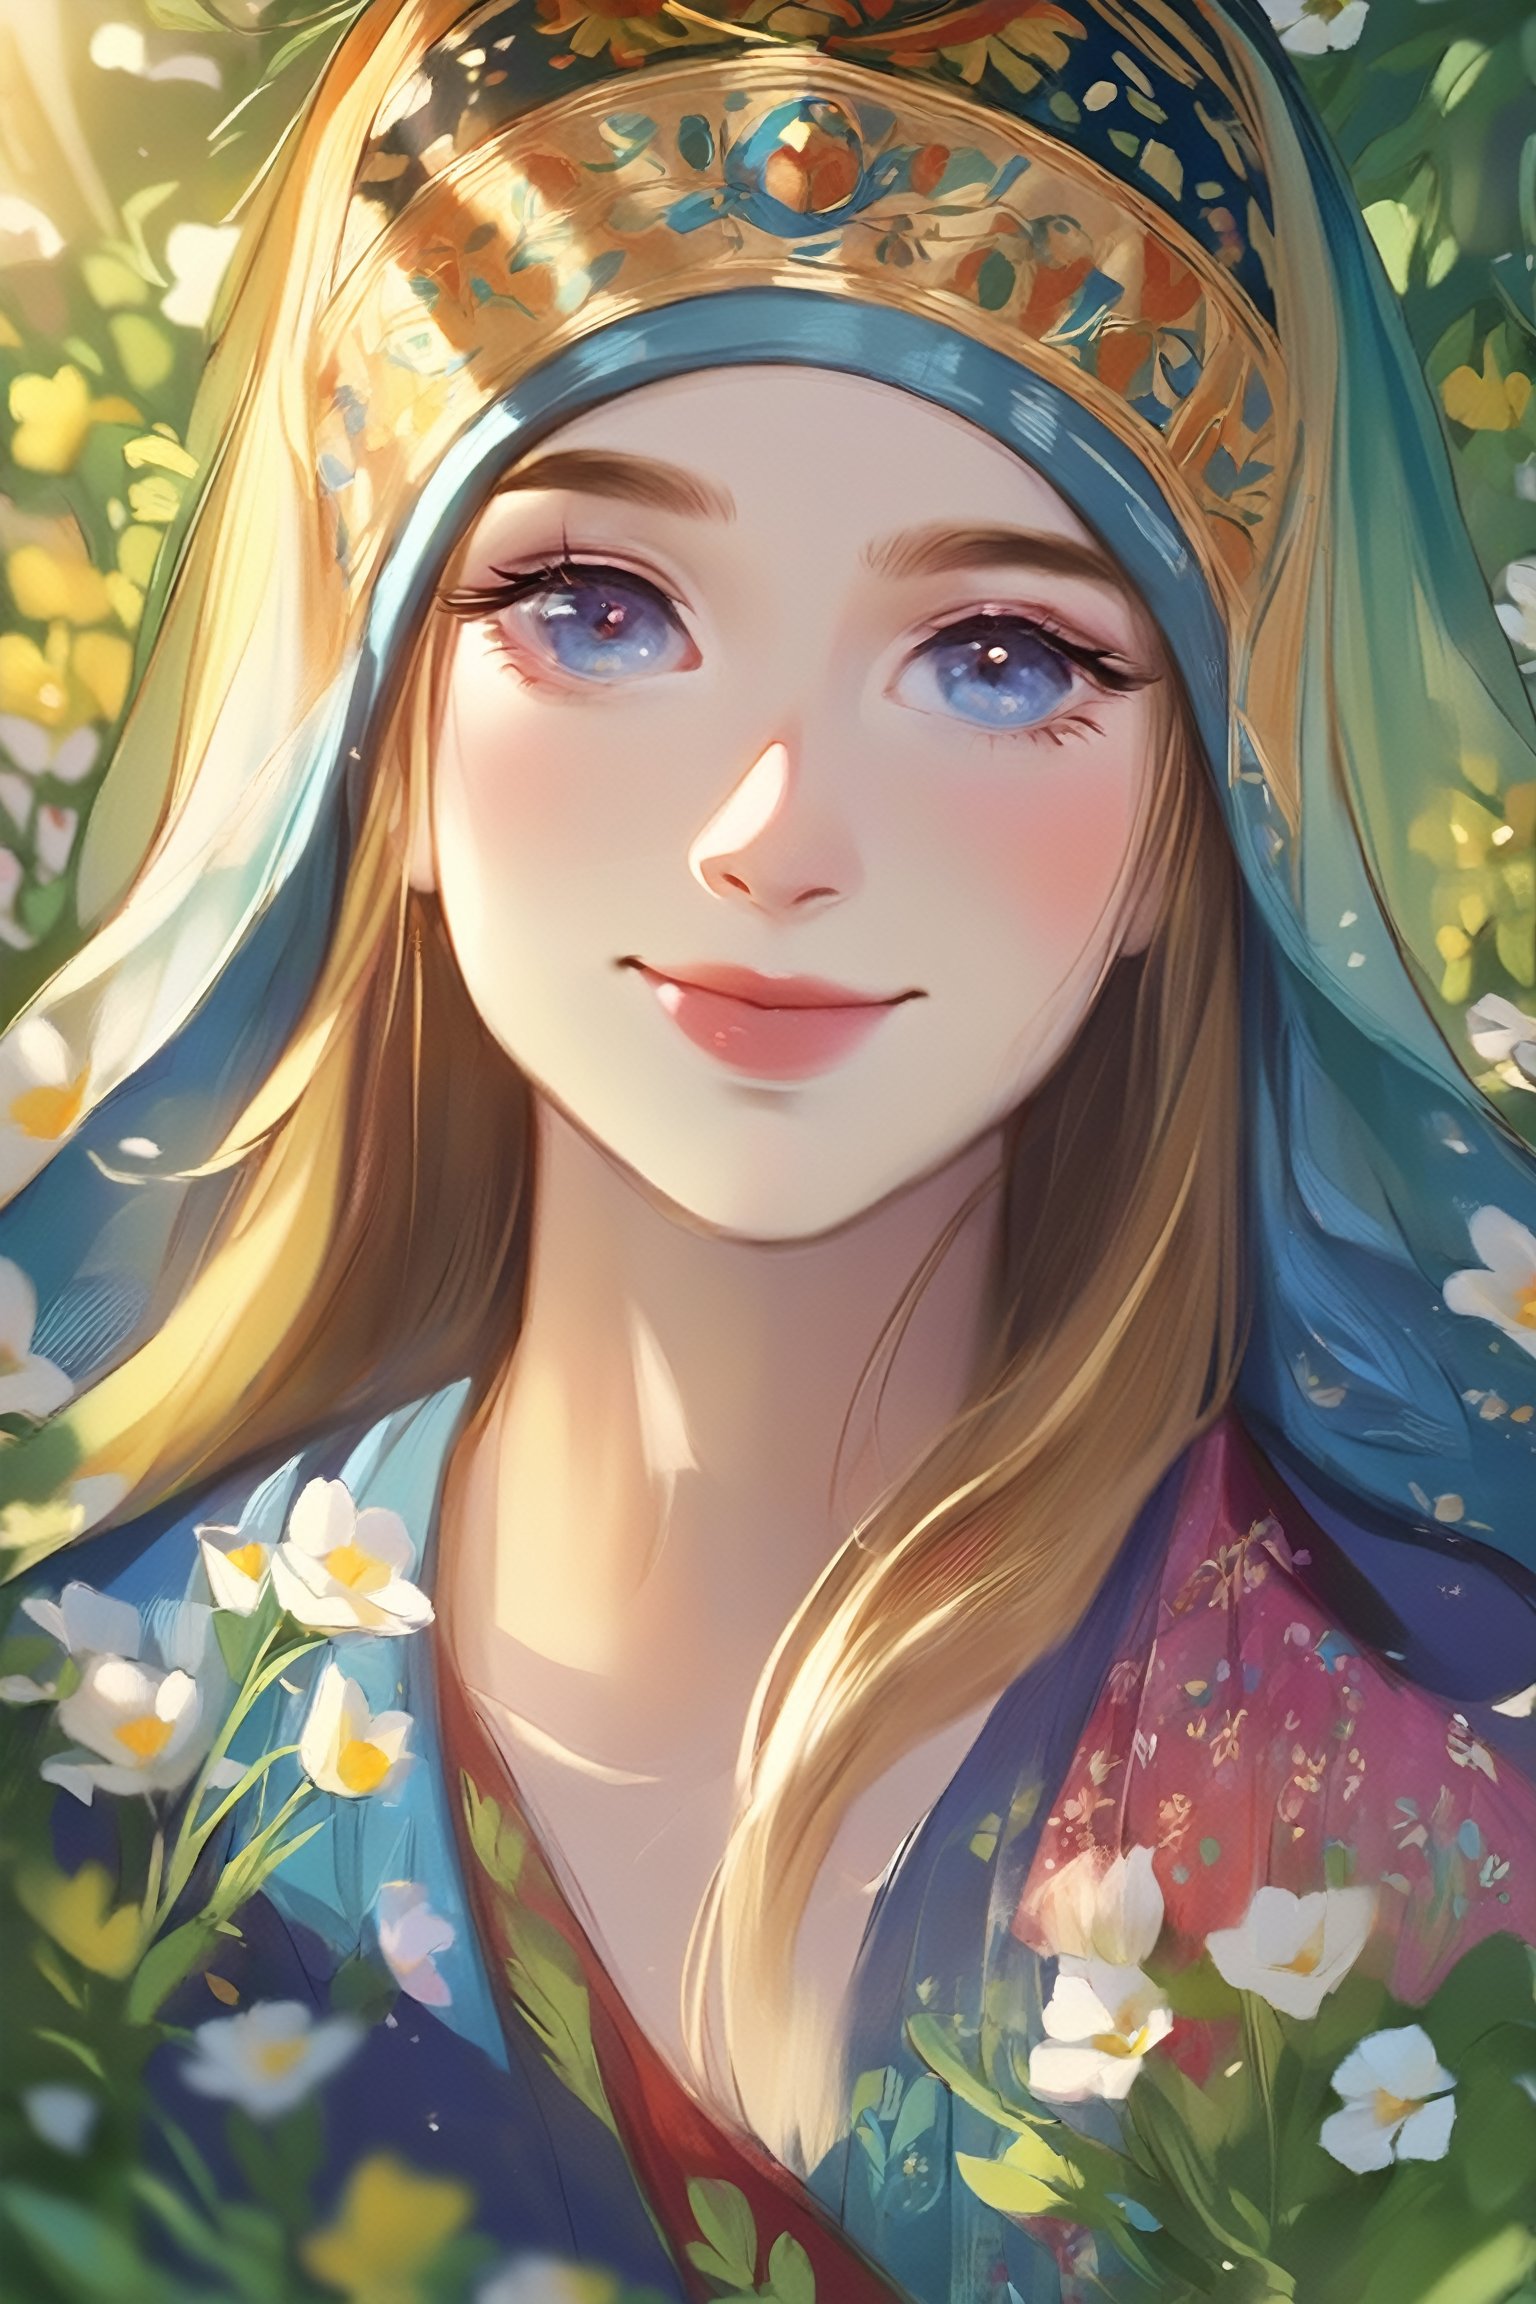 (1girl), a girl in an Orthodox church wears a modest scarf on her head, a long floor-length skirt with a pattern, beautiful girl smiles, beautiful eyes, high detail, clear face, light falls on her face, wildflowers, sunny day, voluminous lighting, soft morning light, sunlight glinting on her skin, Russian beauty (in color, color illustration), (full body, low-key, sharp focus on subject, intricate environment scenery:1.1), (masterpiece, detailed, highres:1.4), (perfect feminine anatomy, perfect proportions, Perfect Hands:1.125), Sweeping cinematic lens flares, ultra crisp details, (f_stop 2.8), (focal_length 85mm f/2.8), K-Eyes, Perfect Hands, Wonder of Beauty, K-Eyes,<lora:EMS-304982-EMS:0.900000>,<lora:EMS-299631-EMS:0.700000>,<lora:EMS-248183-EMS:0.800000>